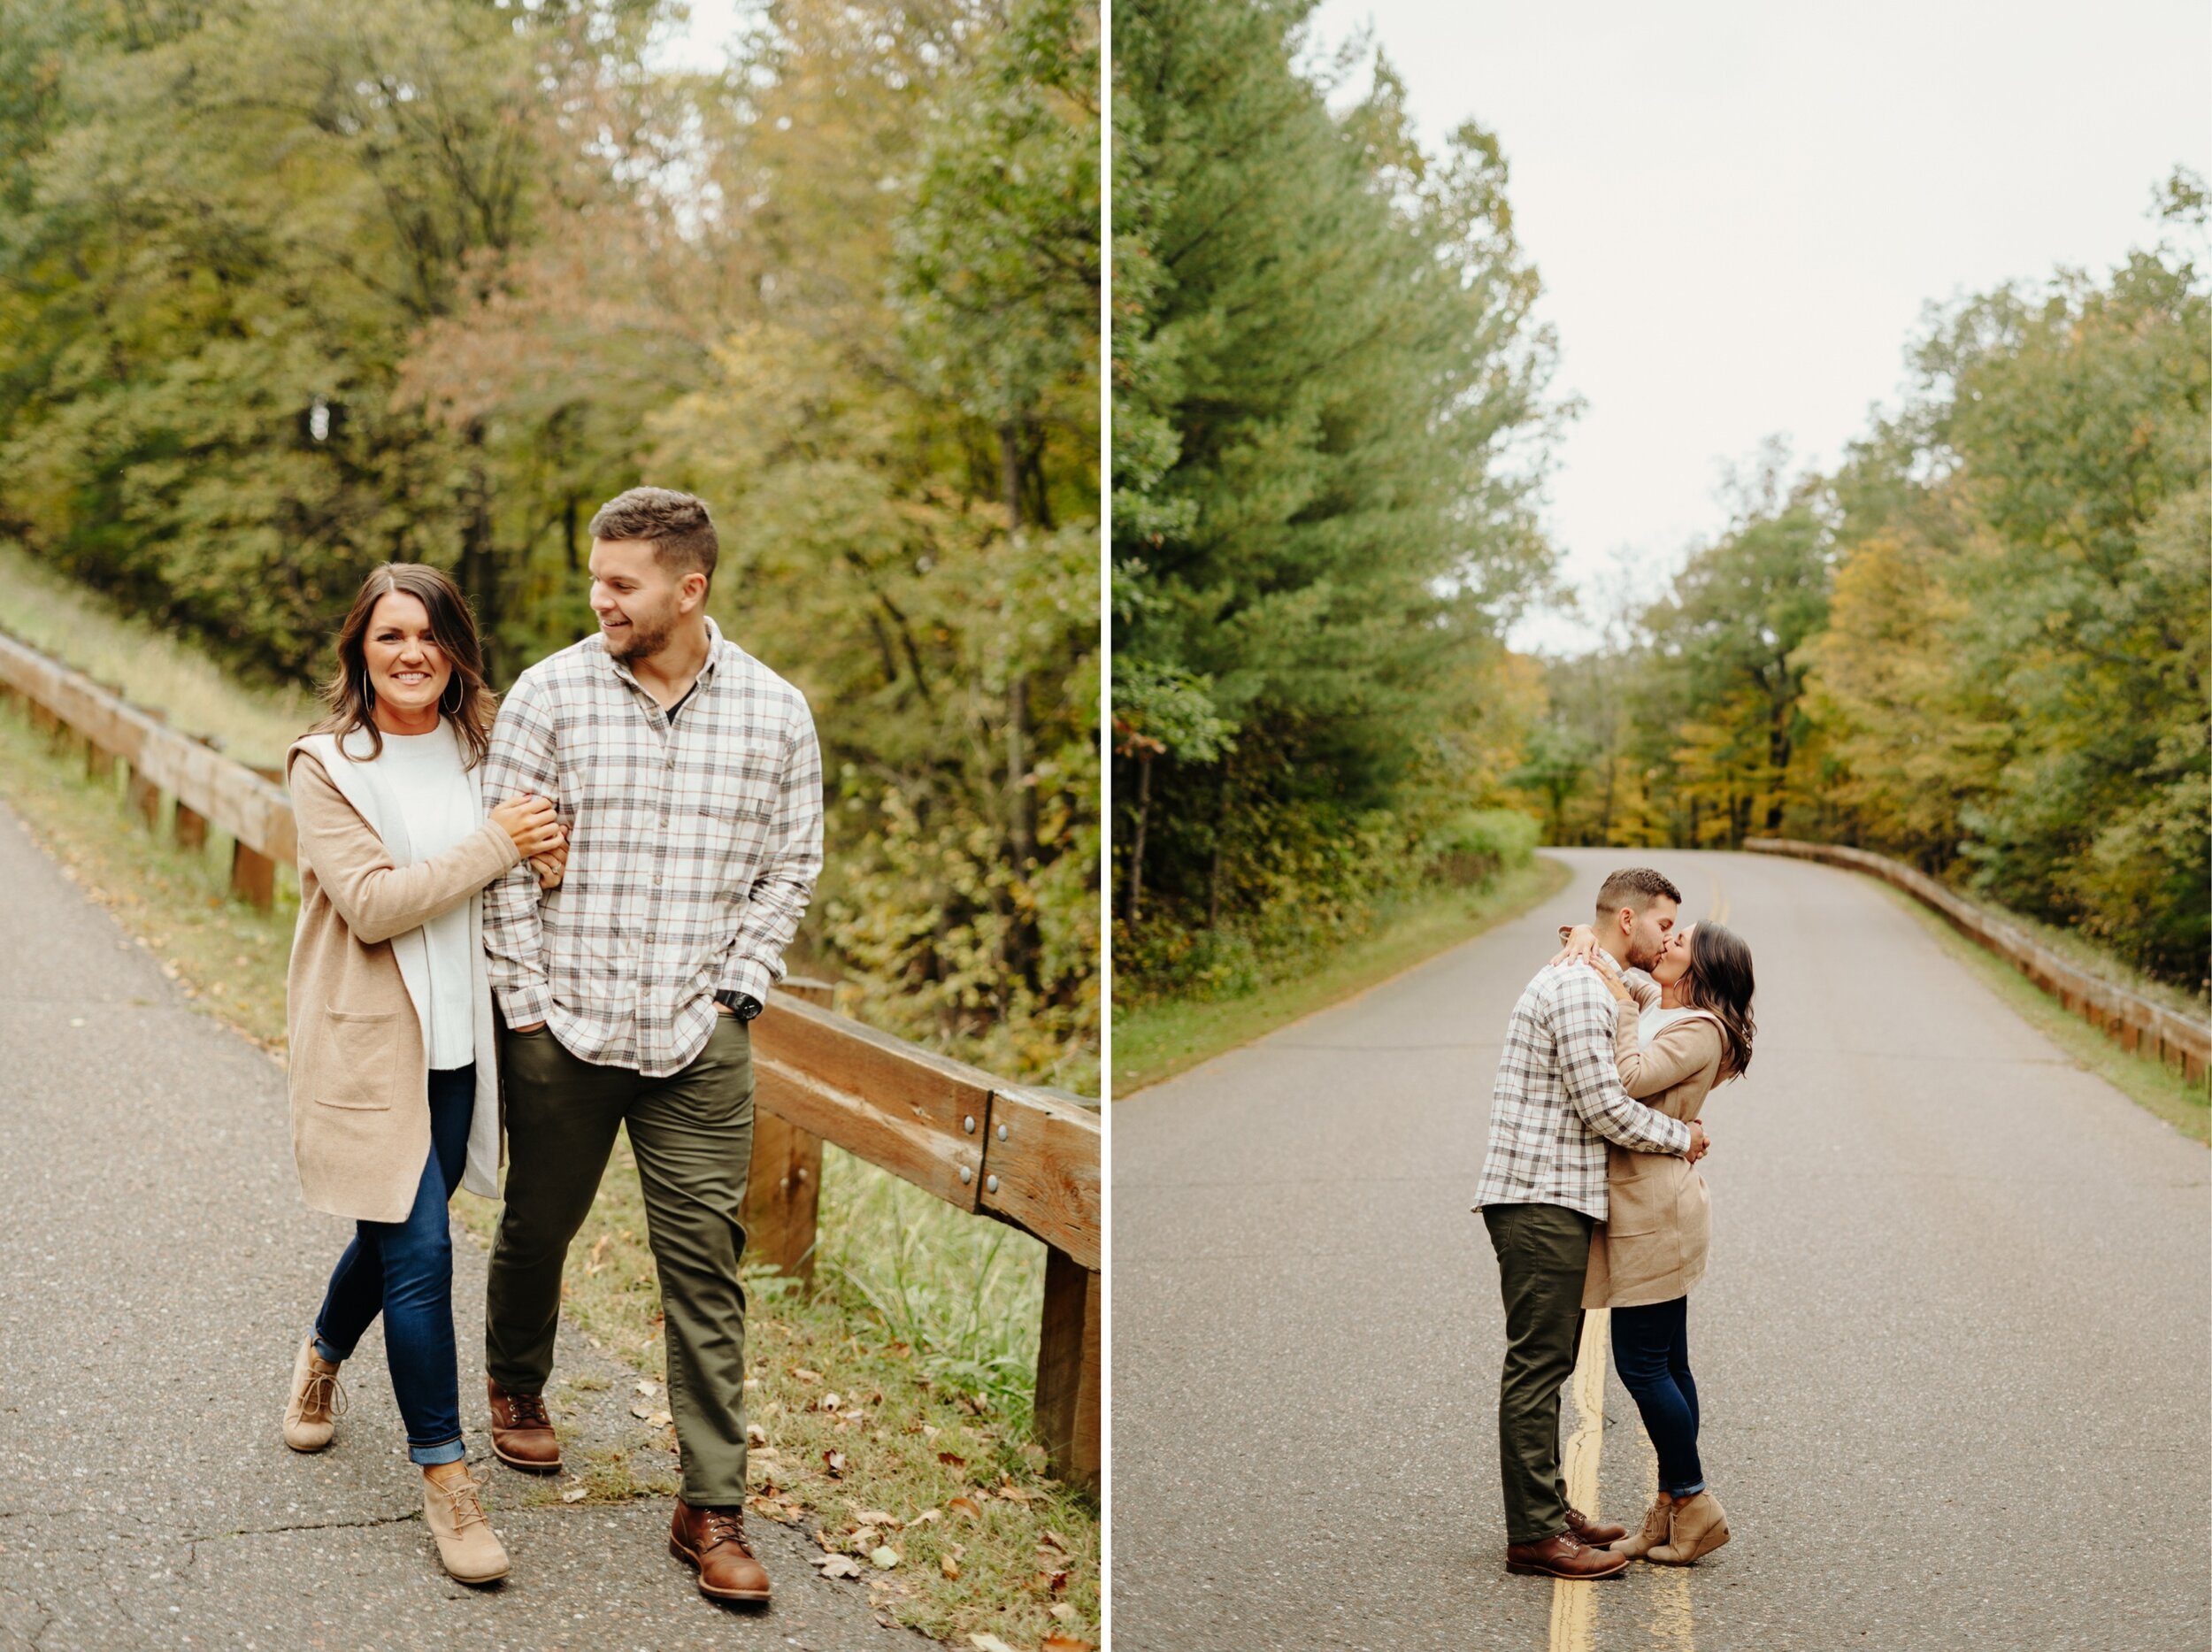 08_taylors-falls-engagement-session-interstate-park-mckenzie-josh-4_taylors-falls-engagement-session-interstate-park-mckenzie-josh-7.jpg